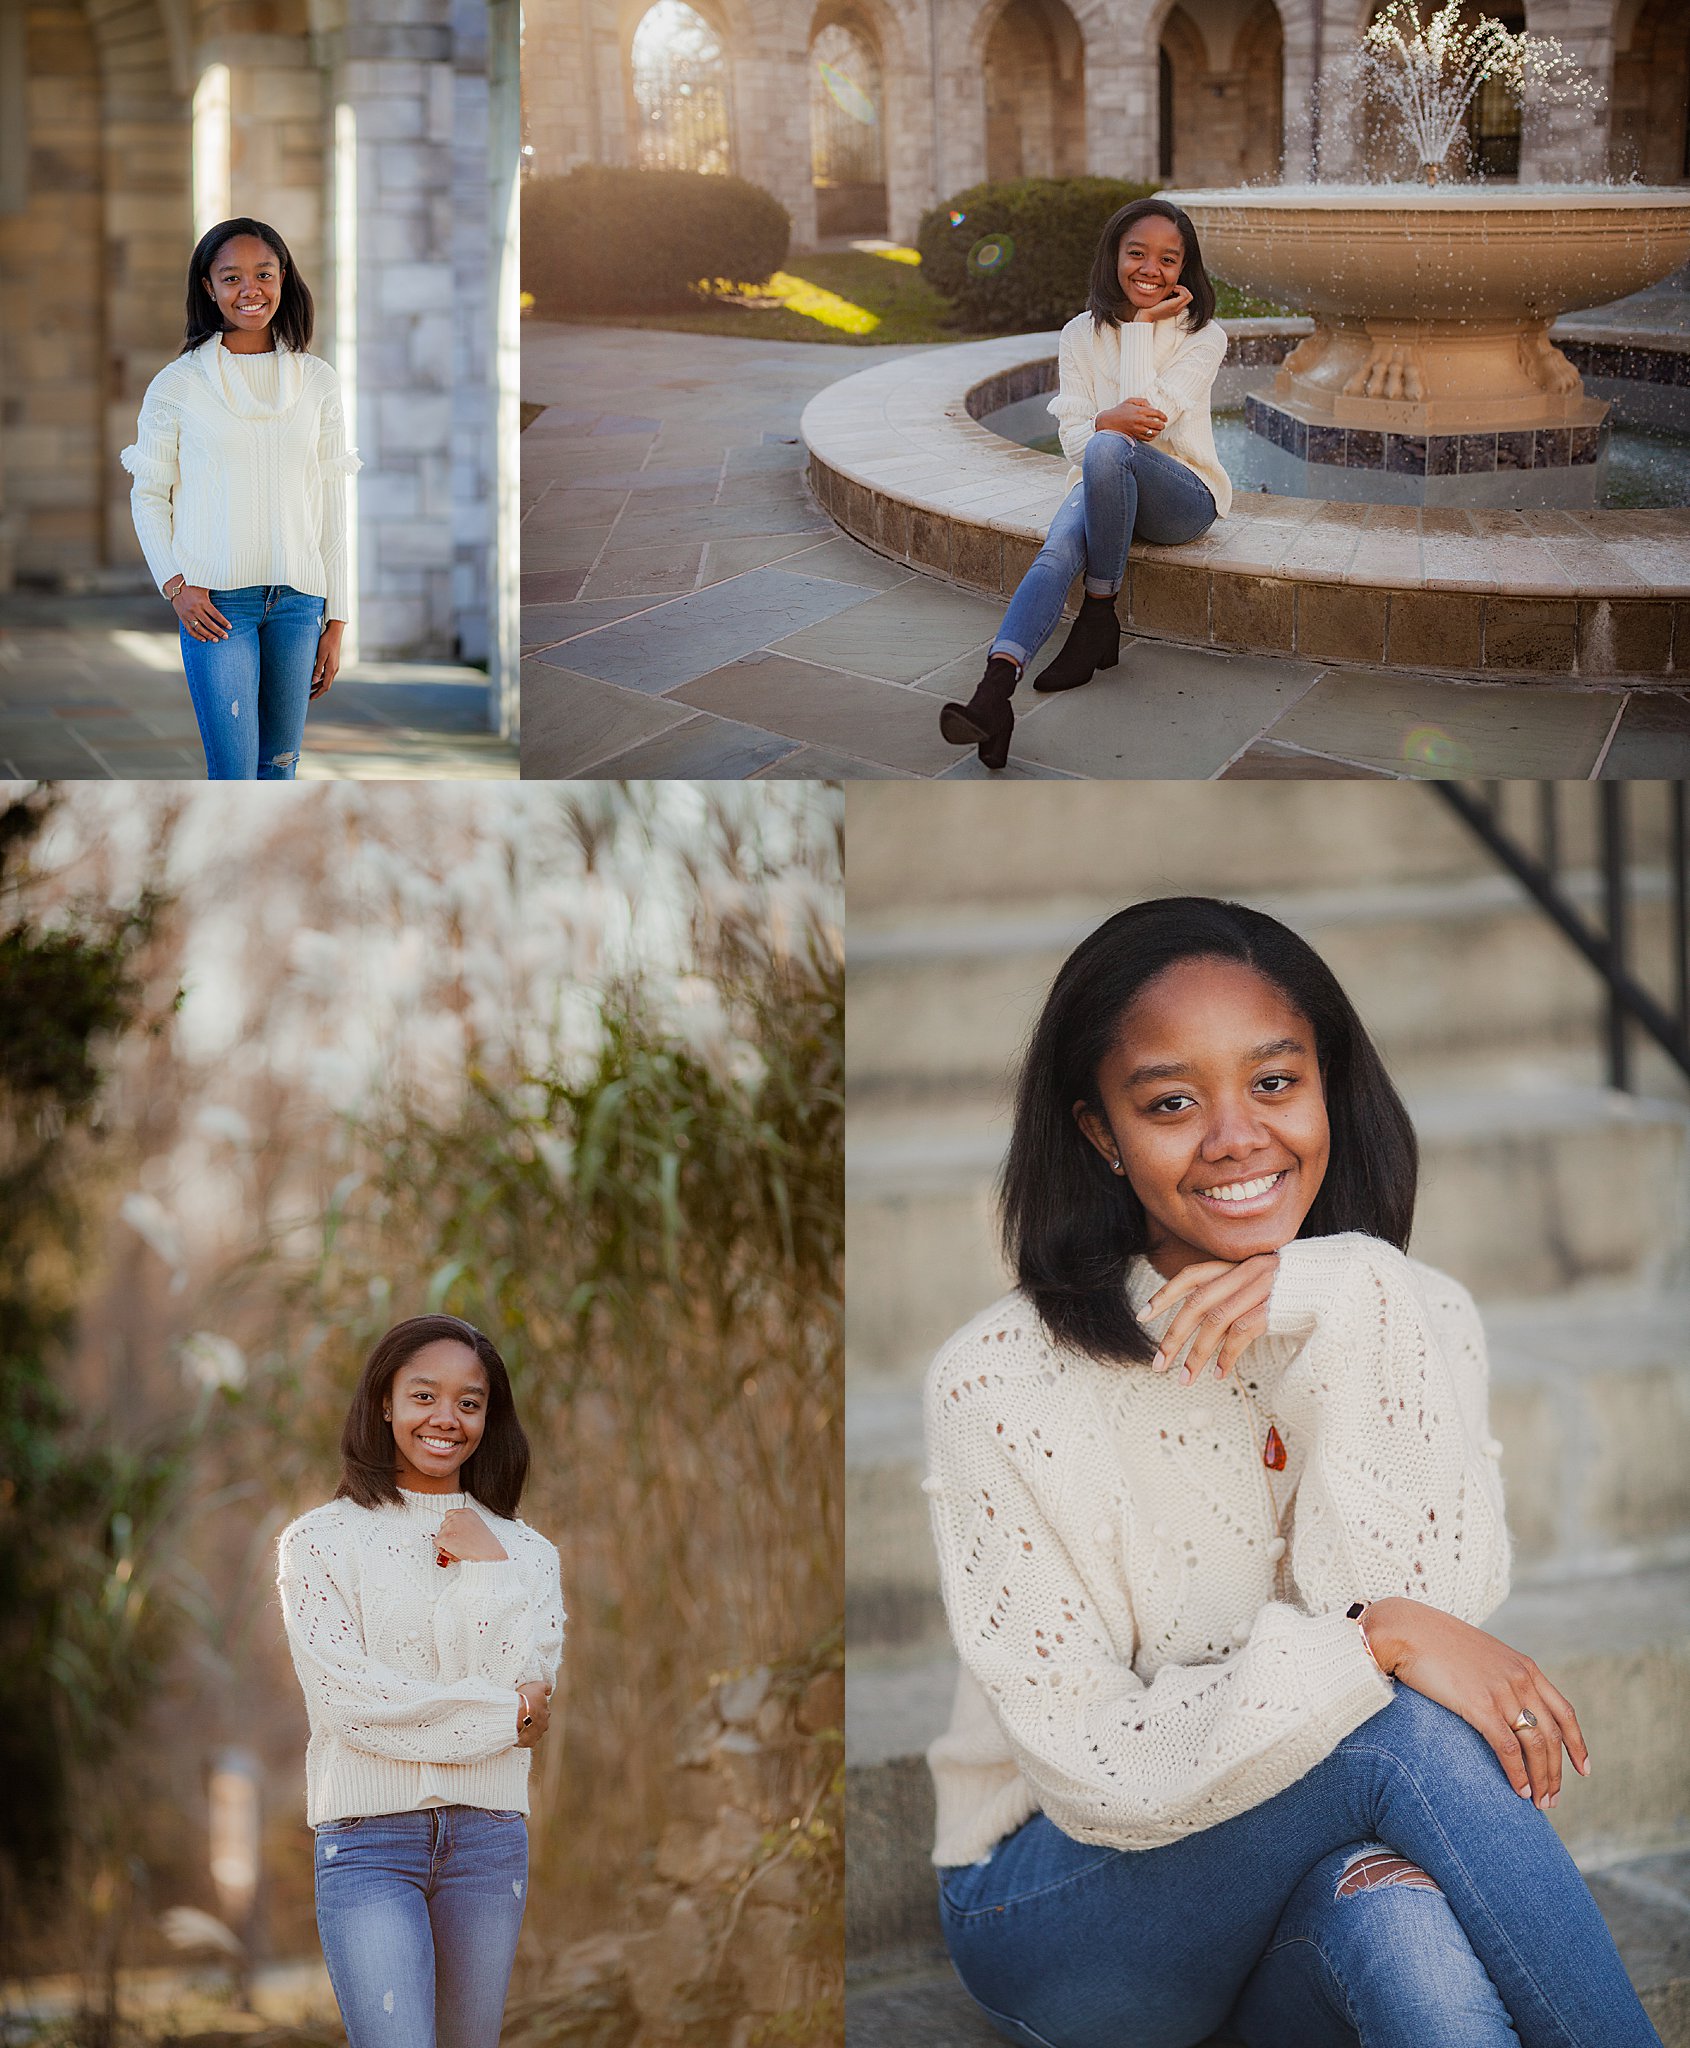 Senior Portrait session at the shrine of st. anthony in Baltimore maryland by Maria Ortiz Photography